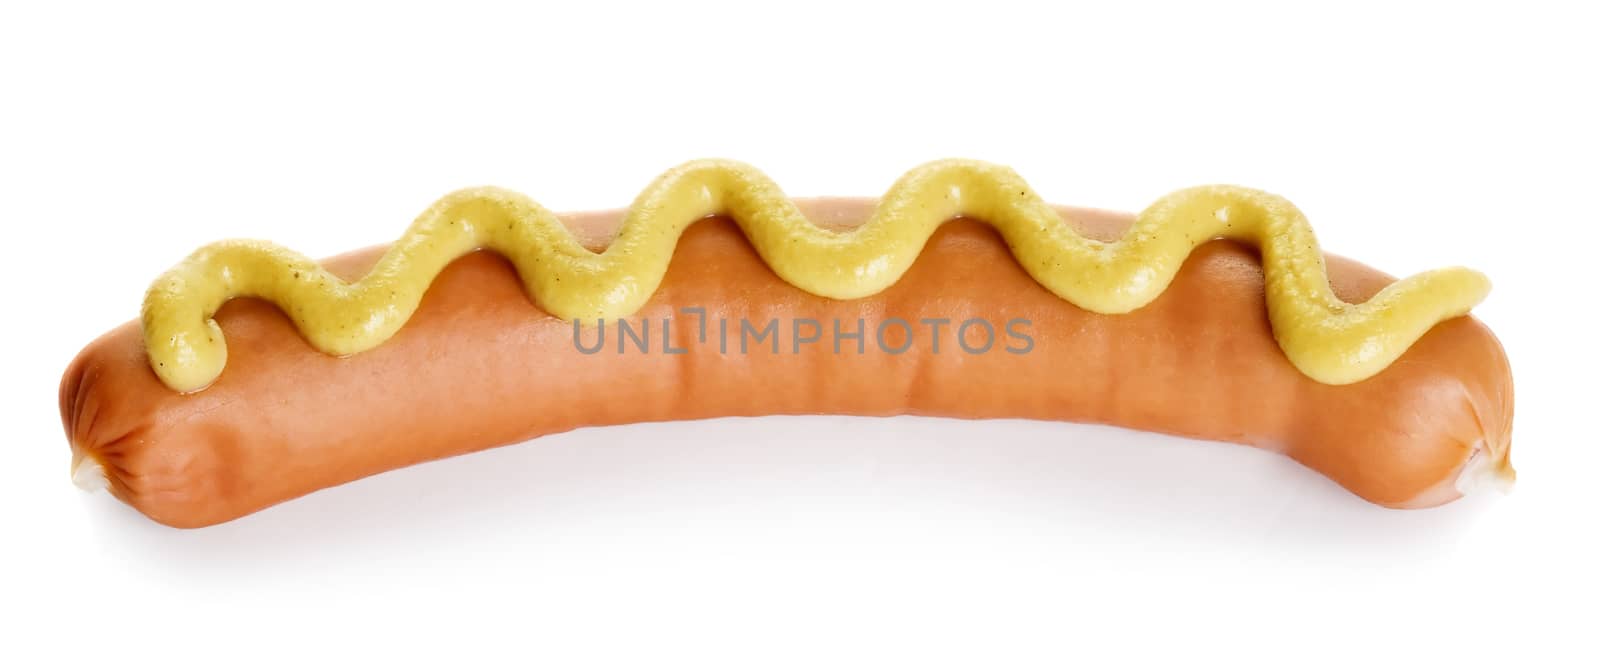 Sausage and mustard isolated on white background